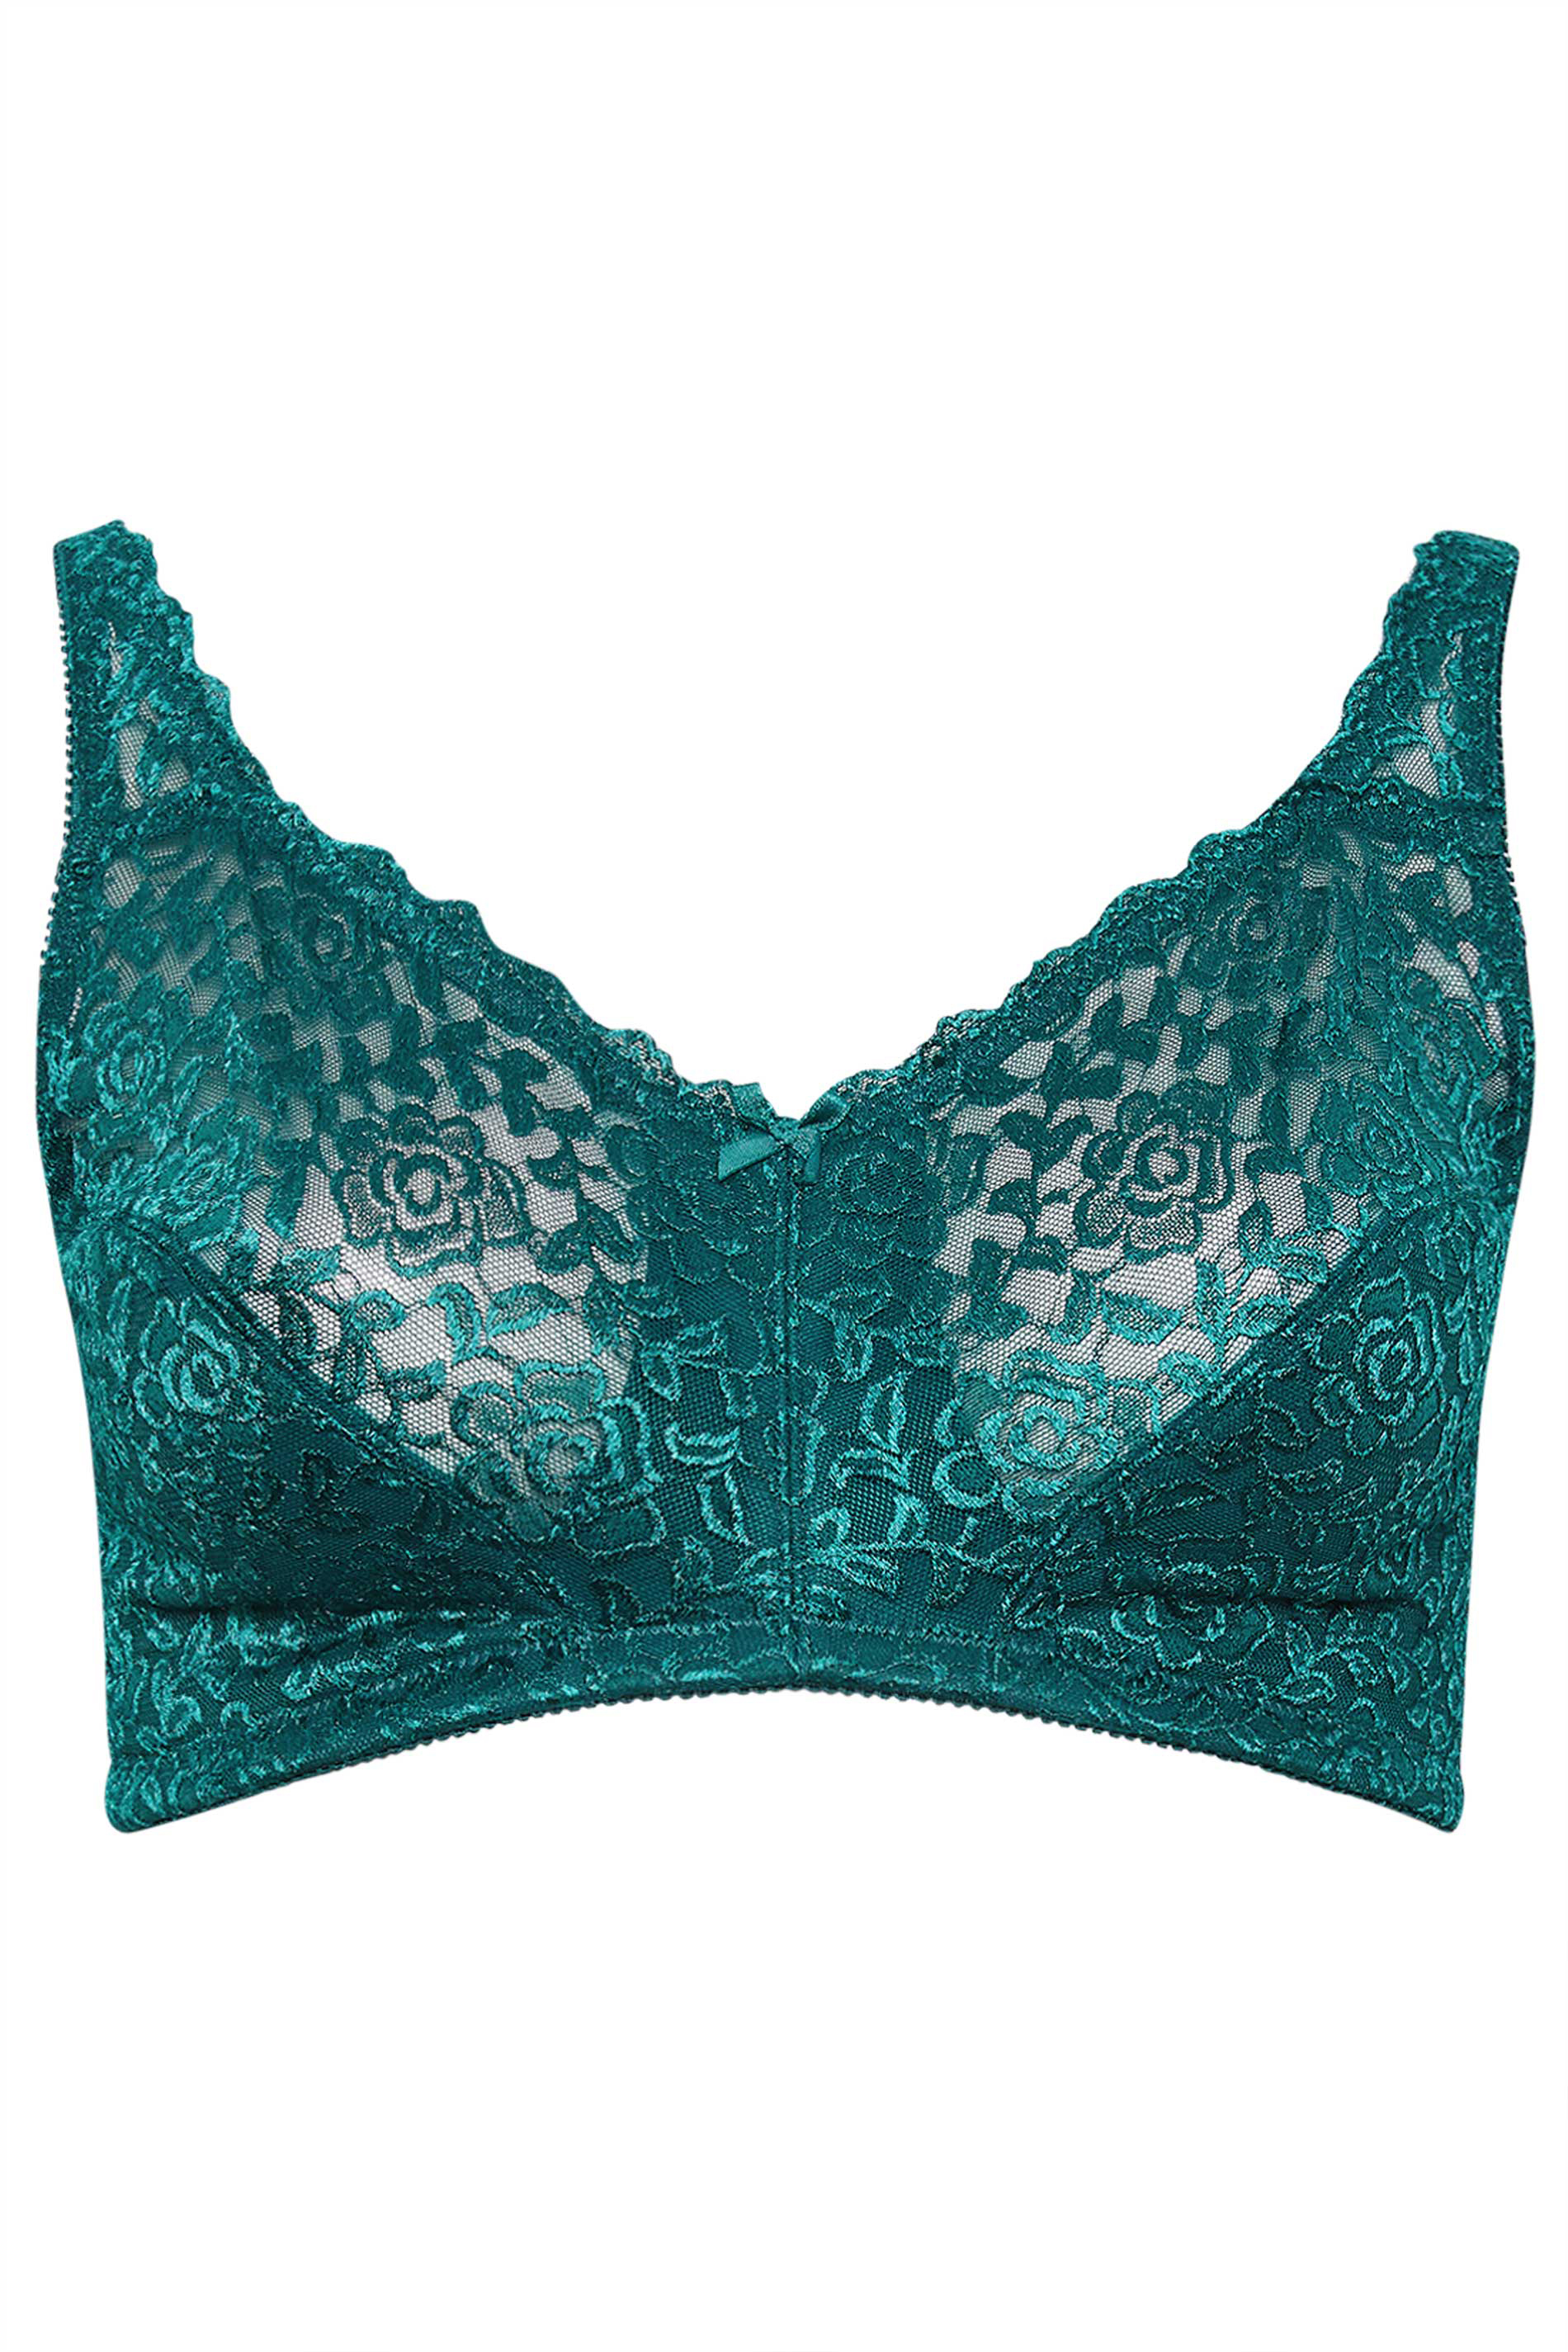 Buy A-GG Turquoise Recycled Lace Full Cup Non Padded Bra - 32C